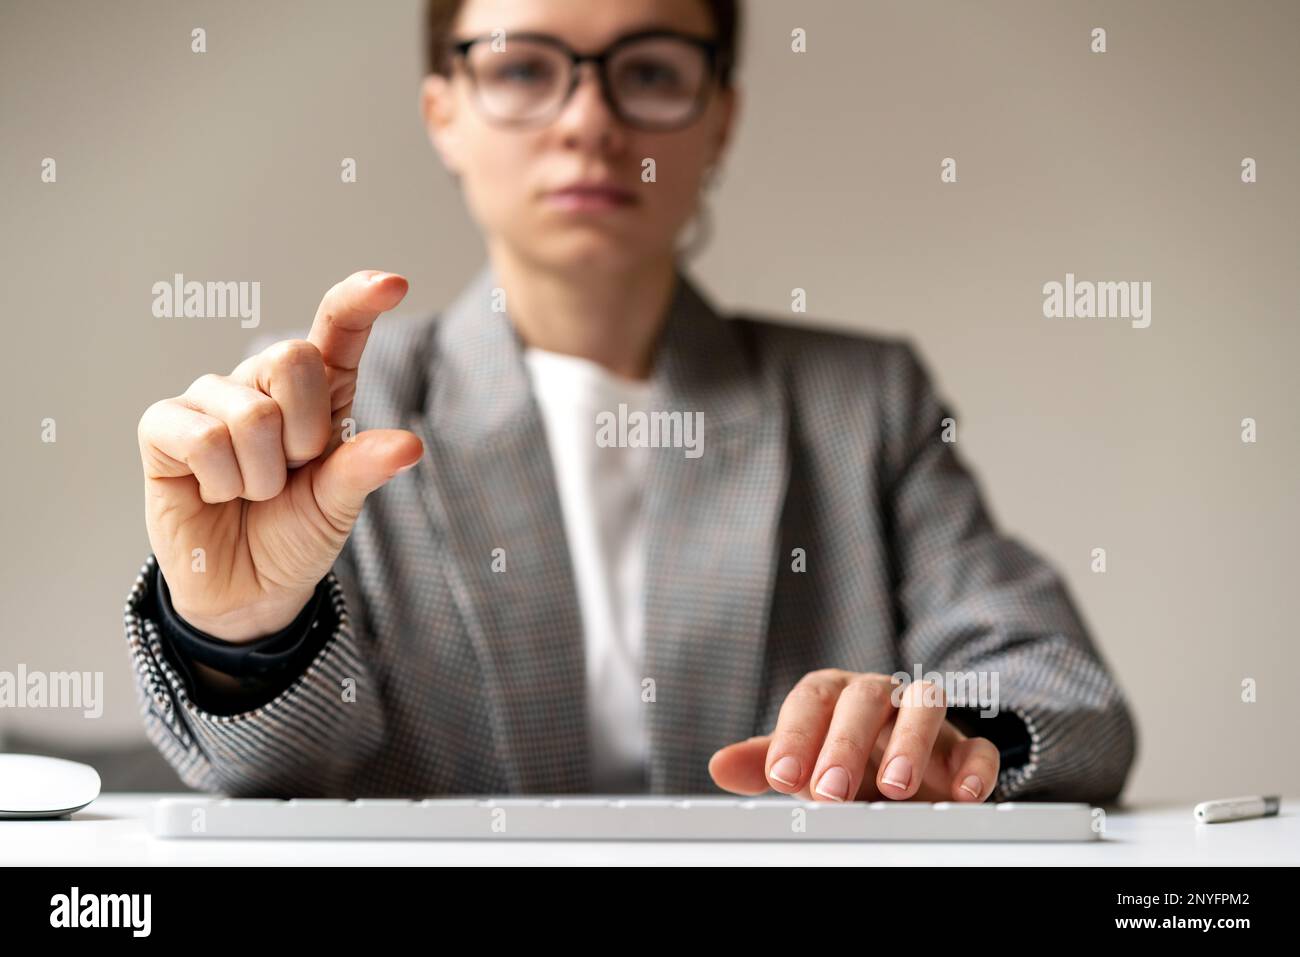 Front view woman sitting at desk using computer keyboard and holding virtual object between her fingers. Stock Photo